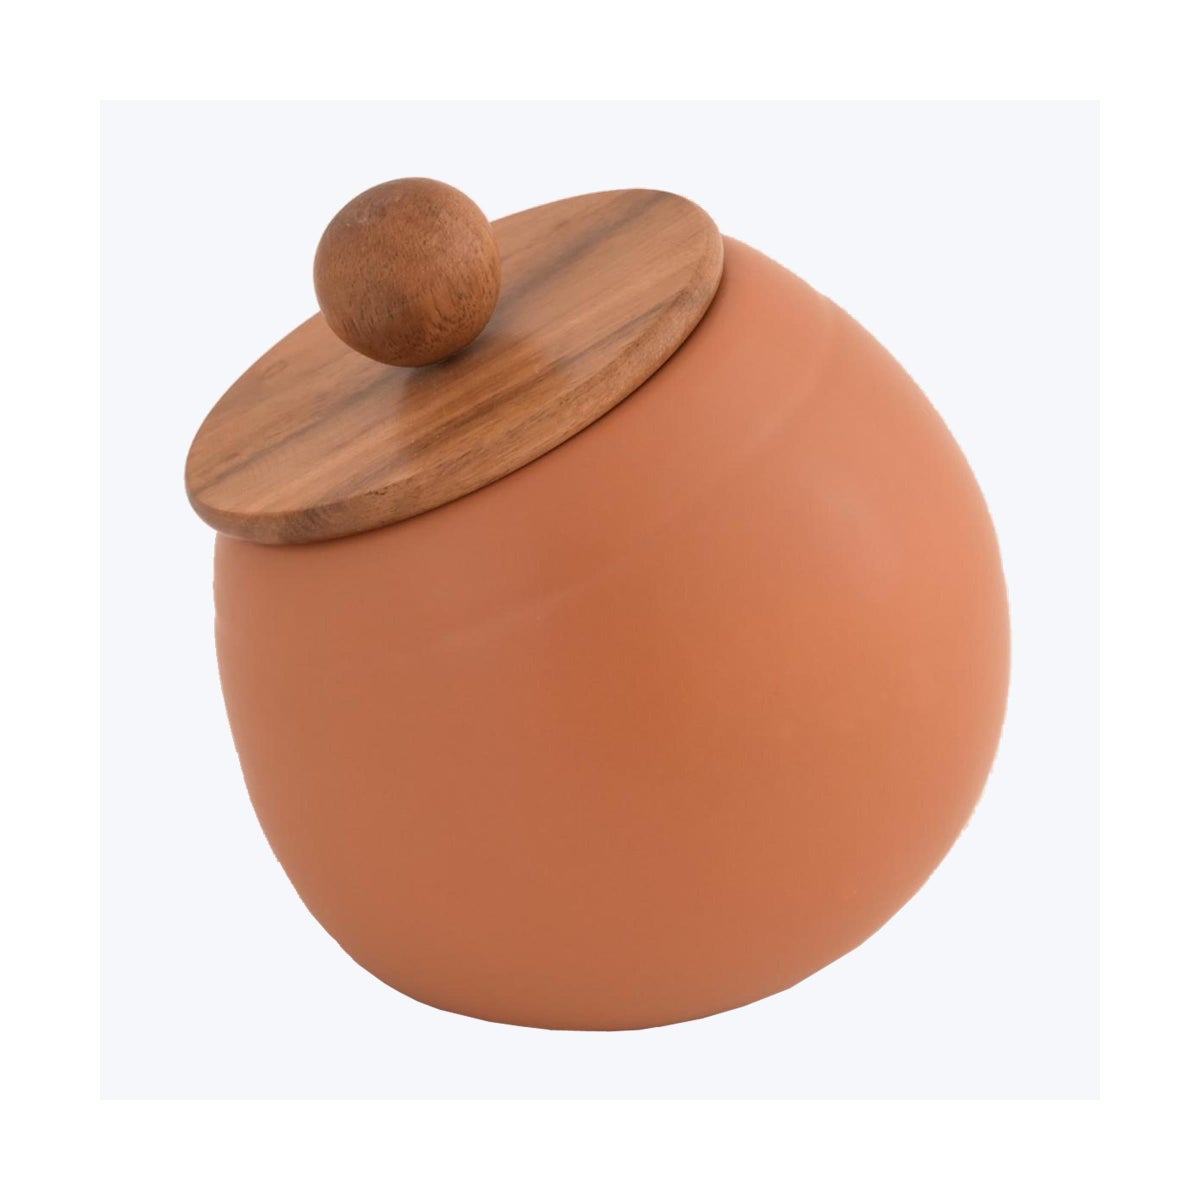 Ceramic Canister with Wood Lid